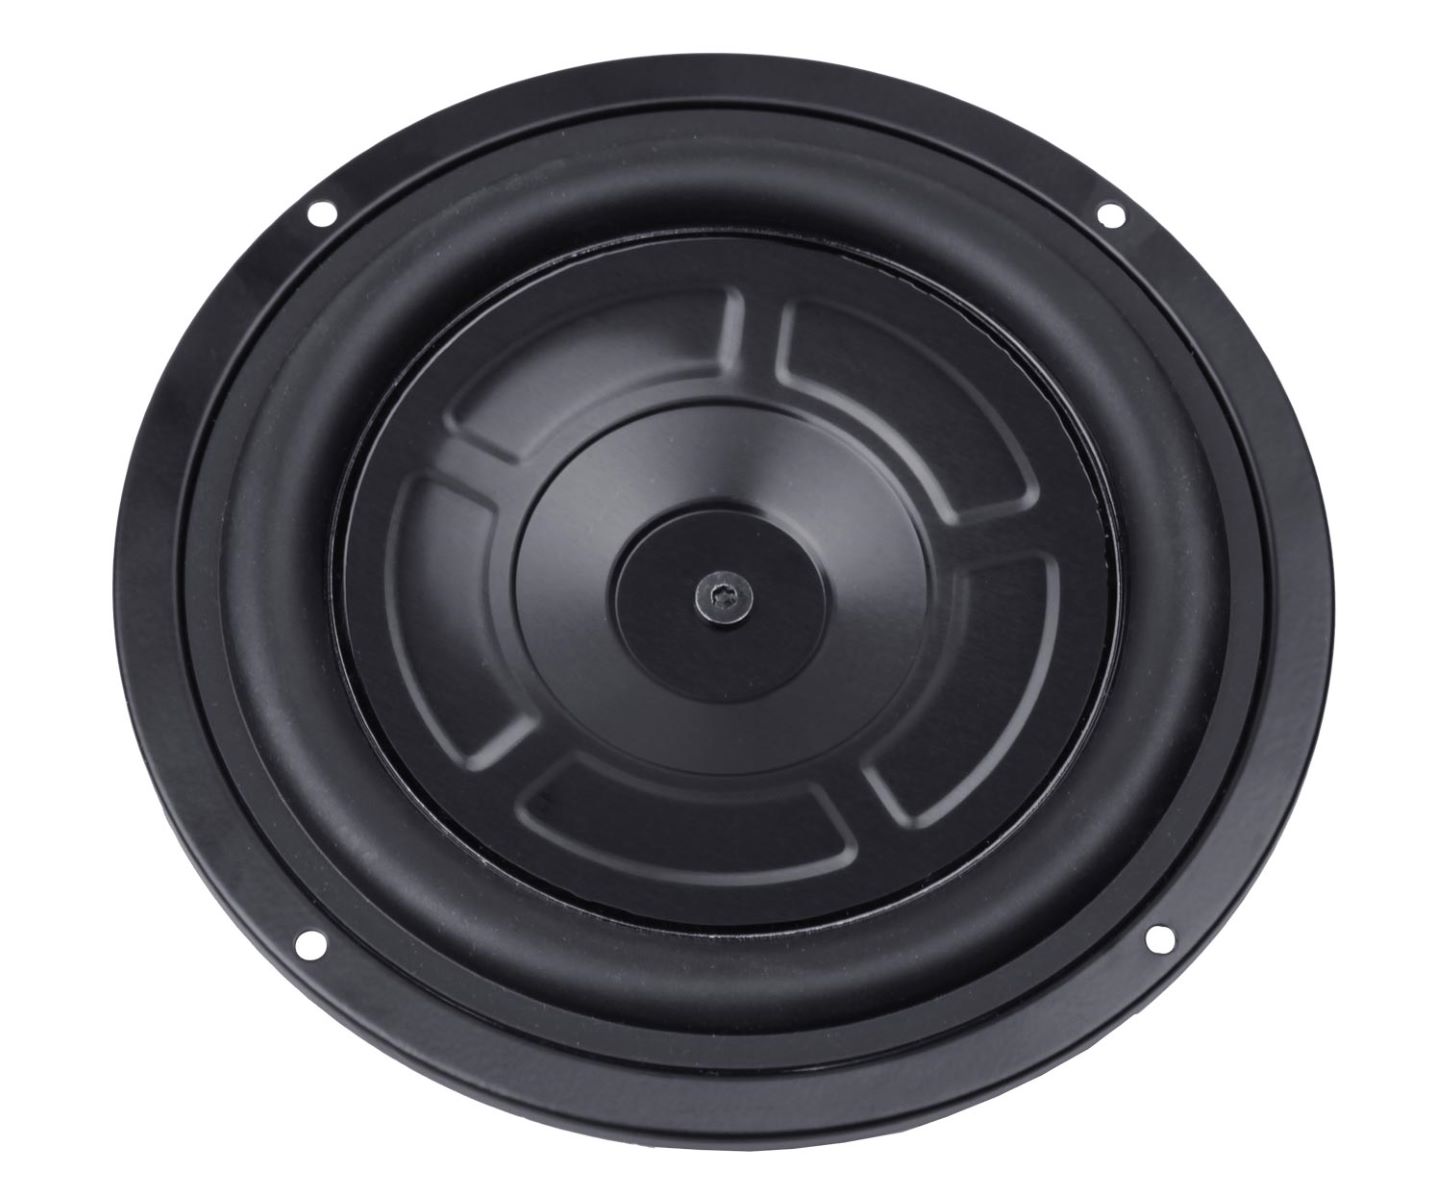 What Is A Passive Radiator Subwoofer